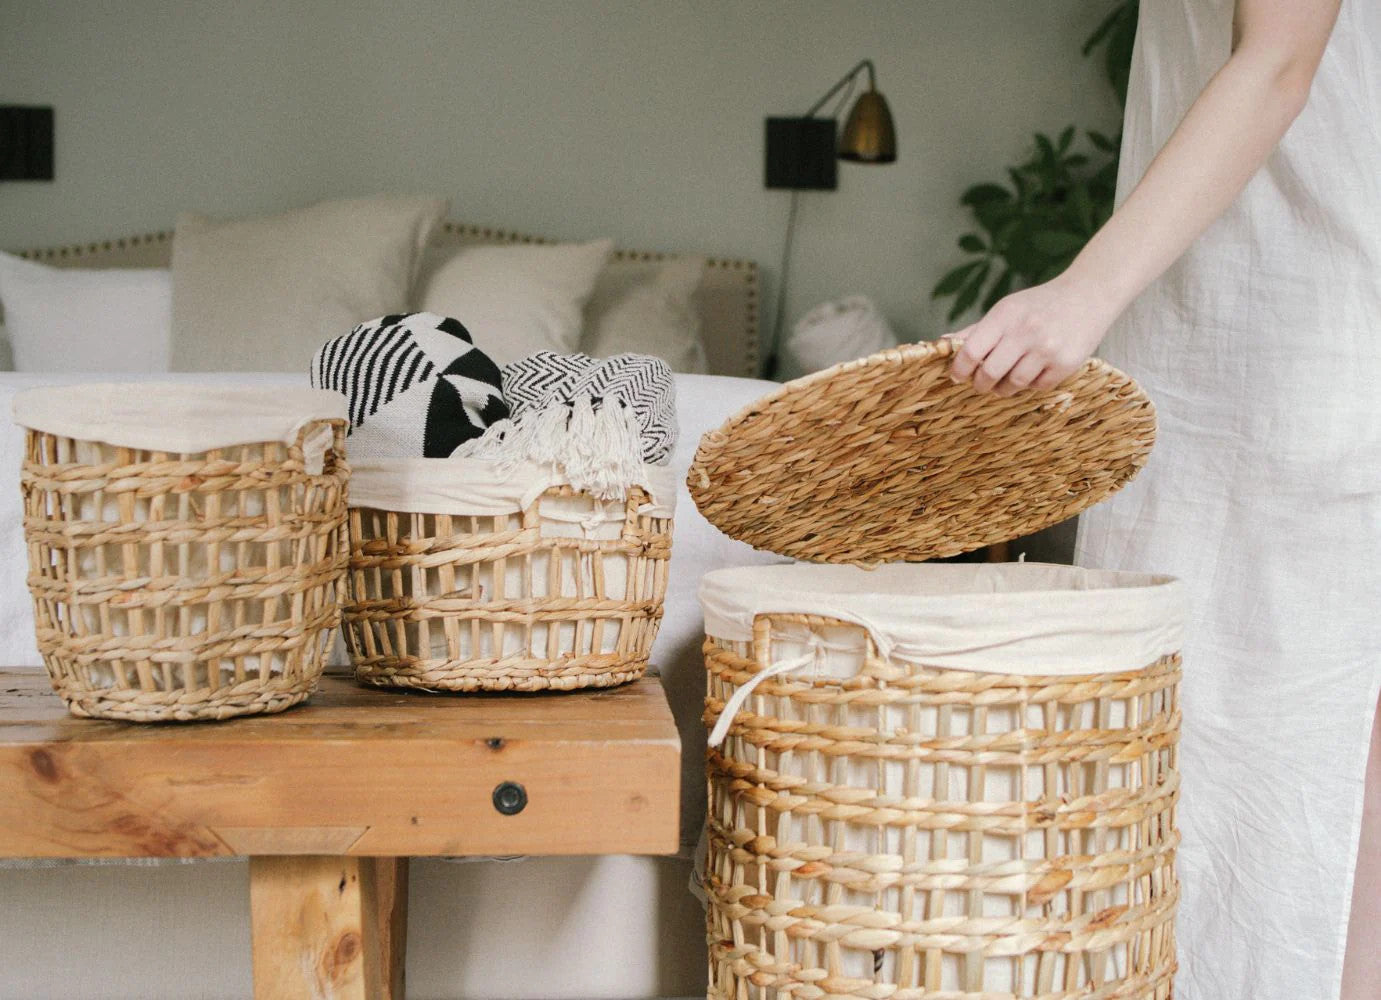 Dinh Hoa wicker baskets for laundry